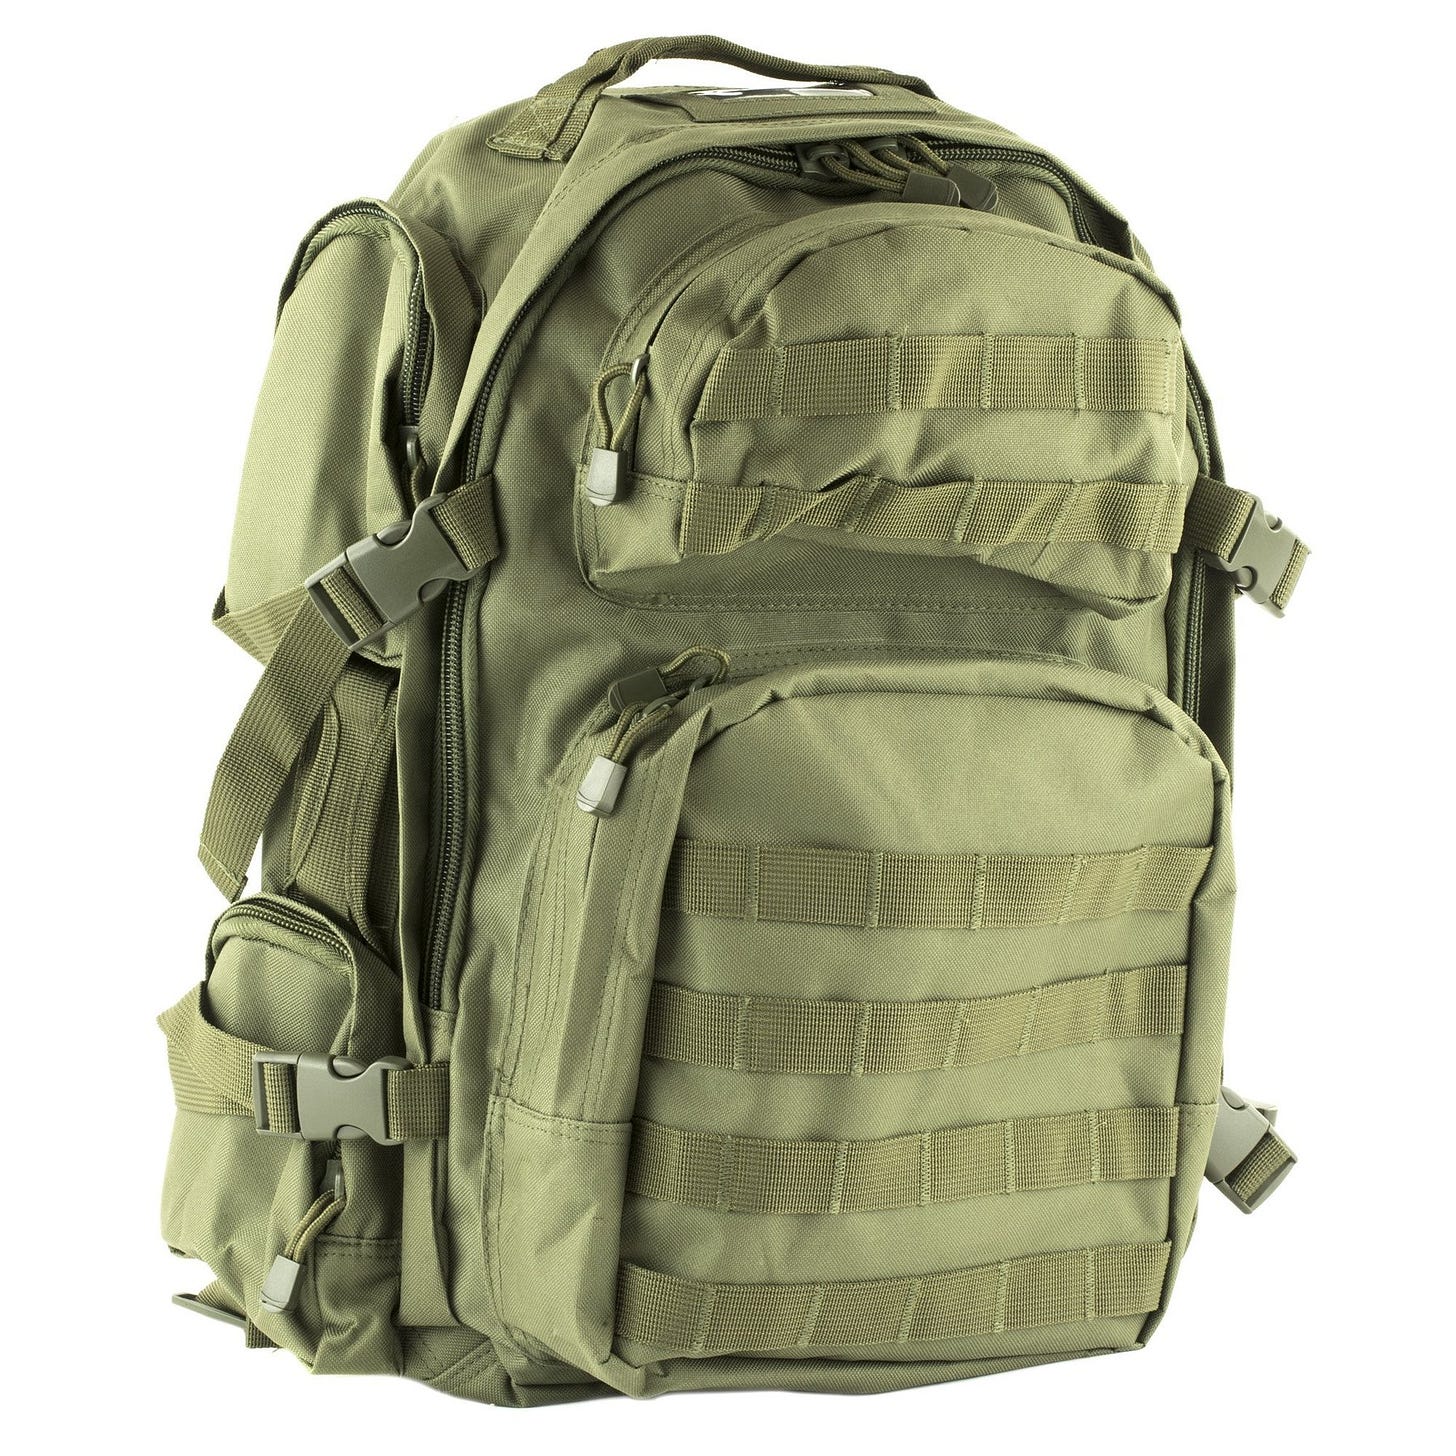 NcStar tactical backpack